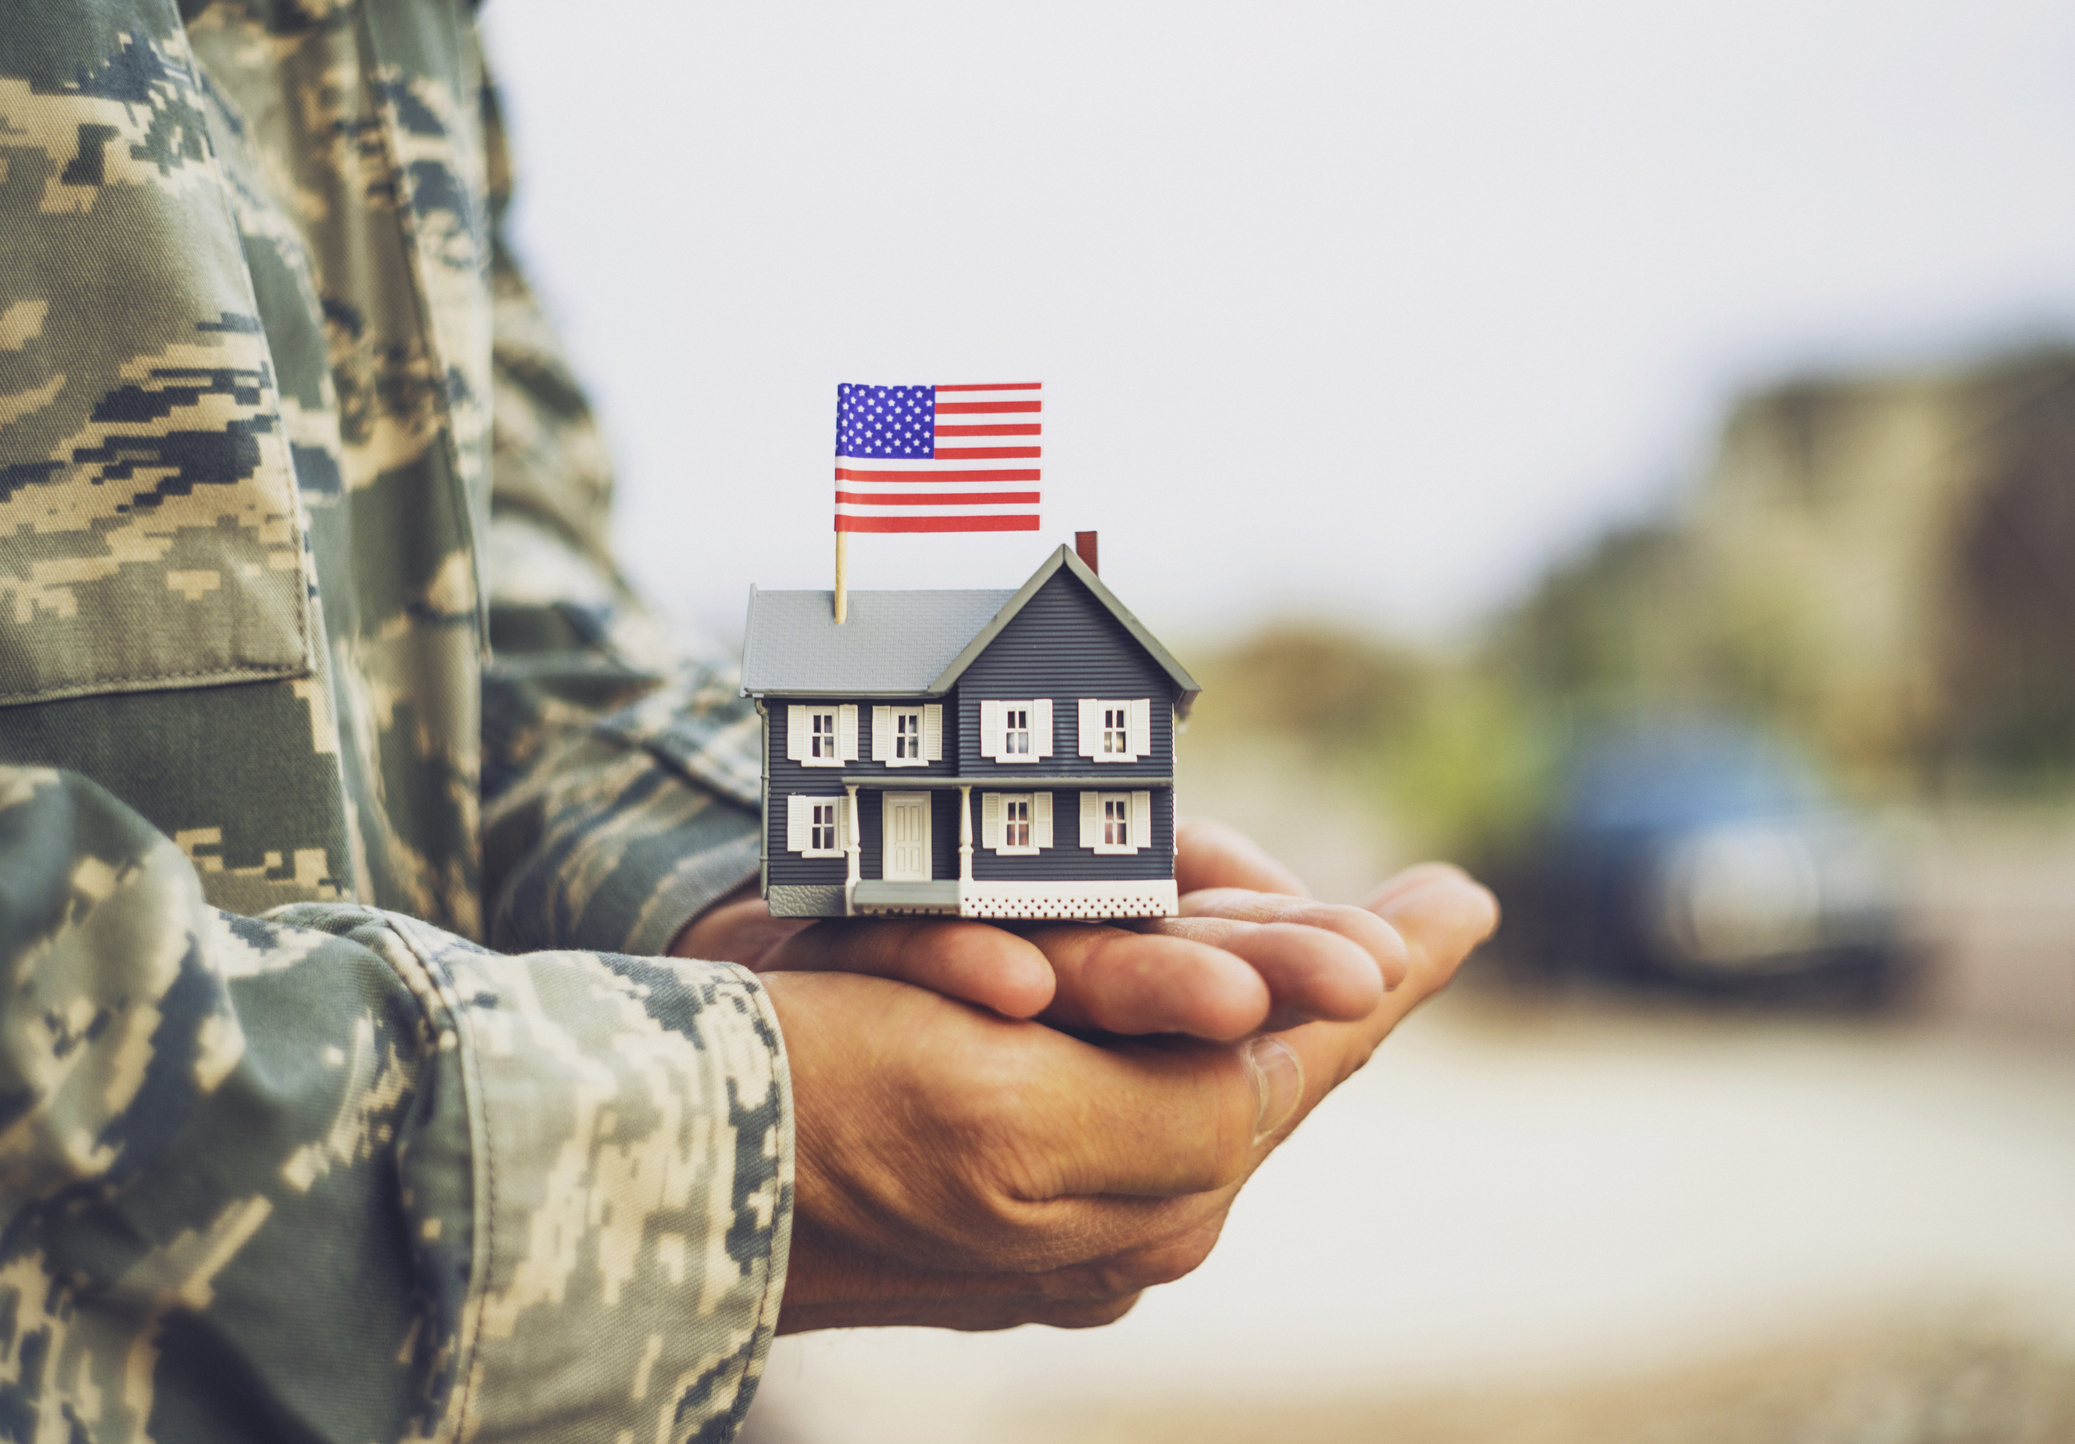 Military Vets No Longer Homeless As U.S. Nearly Reaches Its Goal In Housing Them